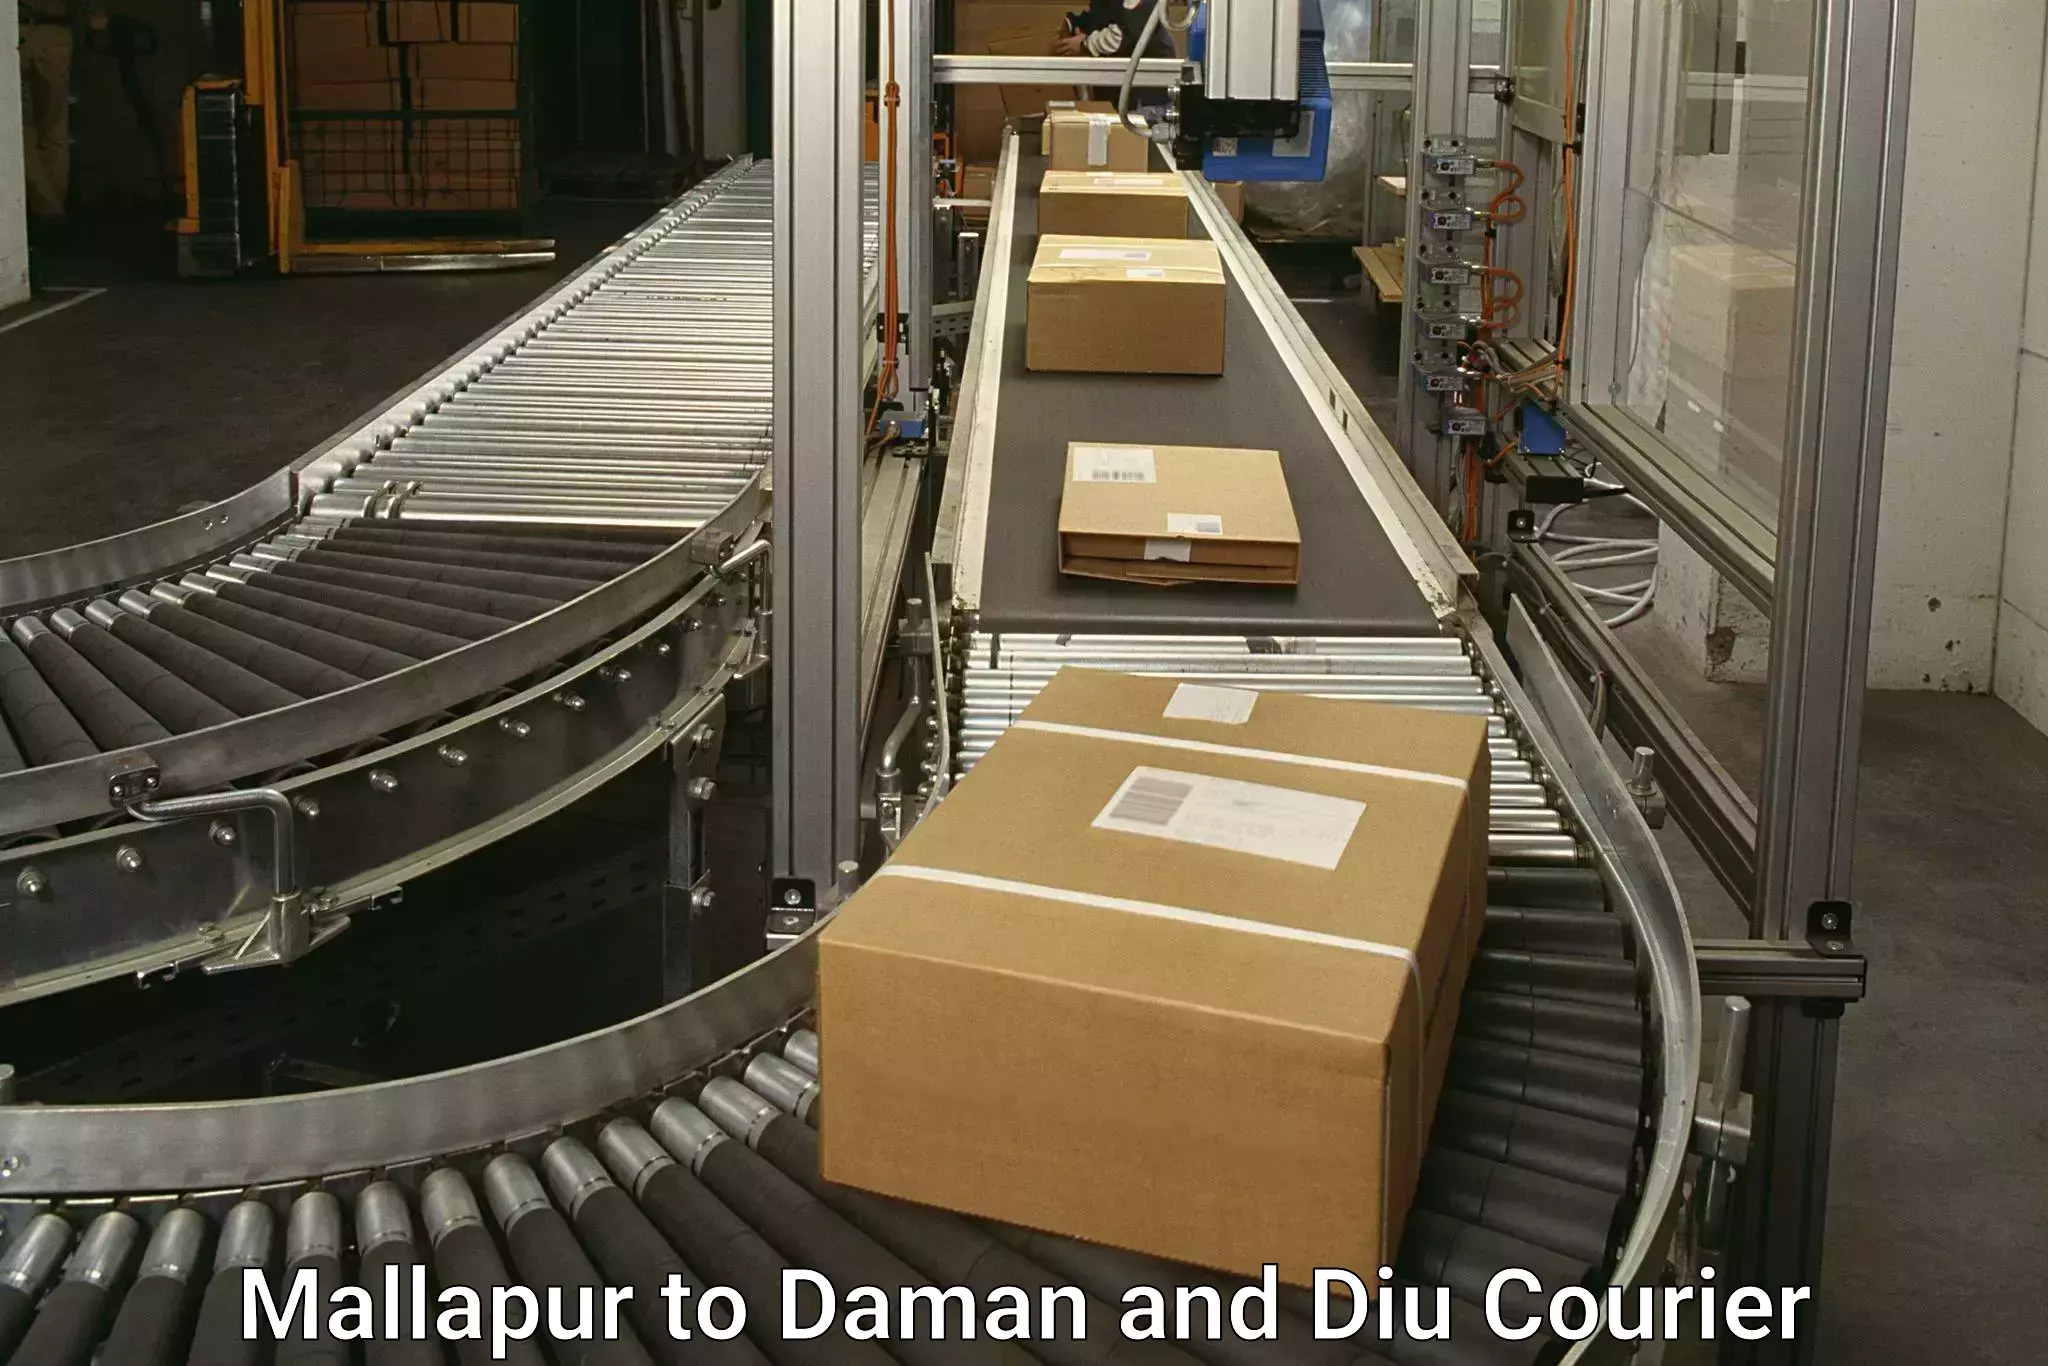 Courier service partnerships Mallapur to Diu